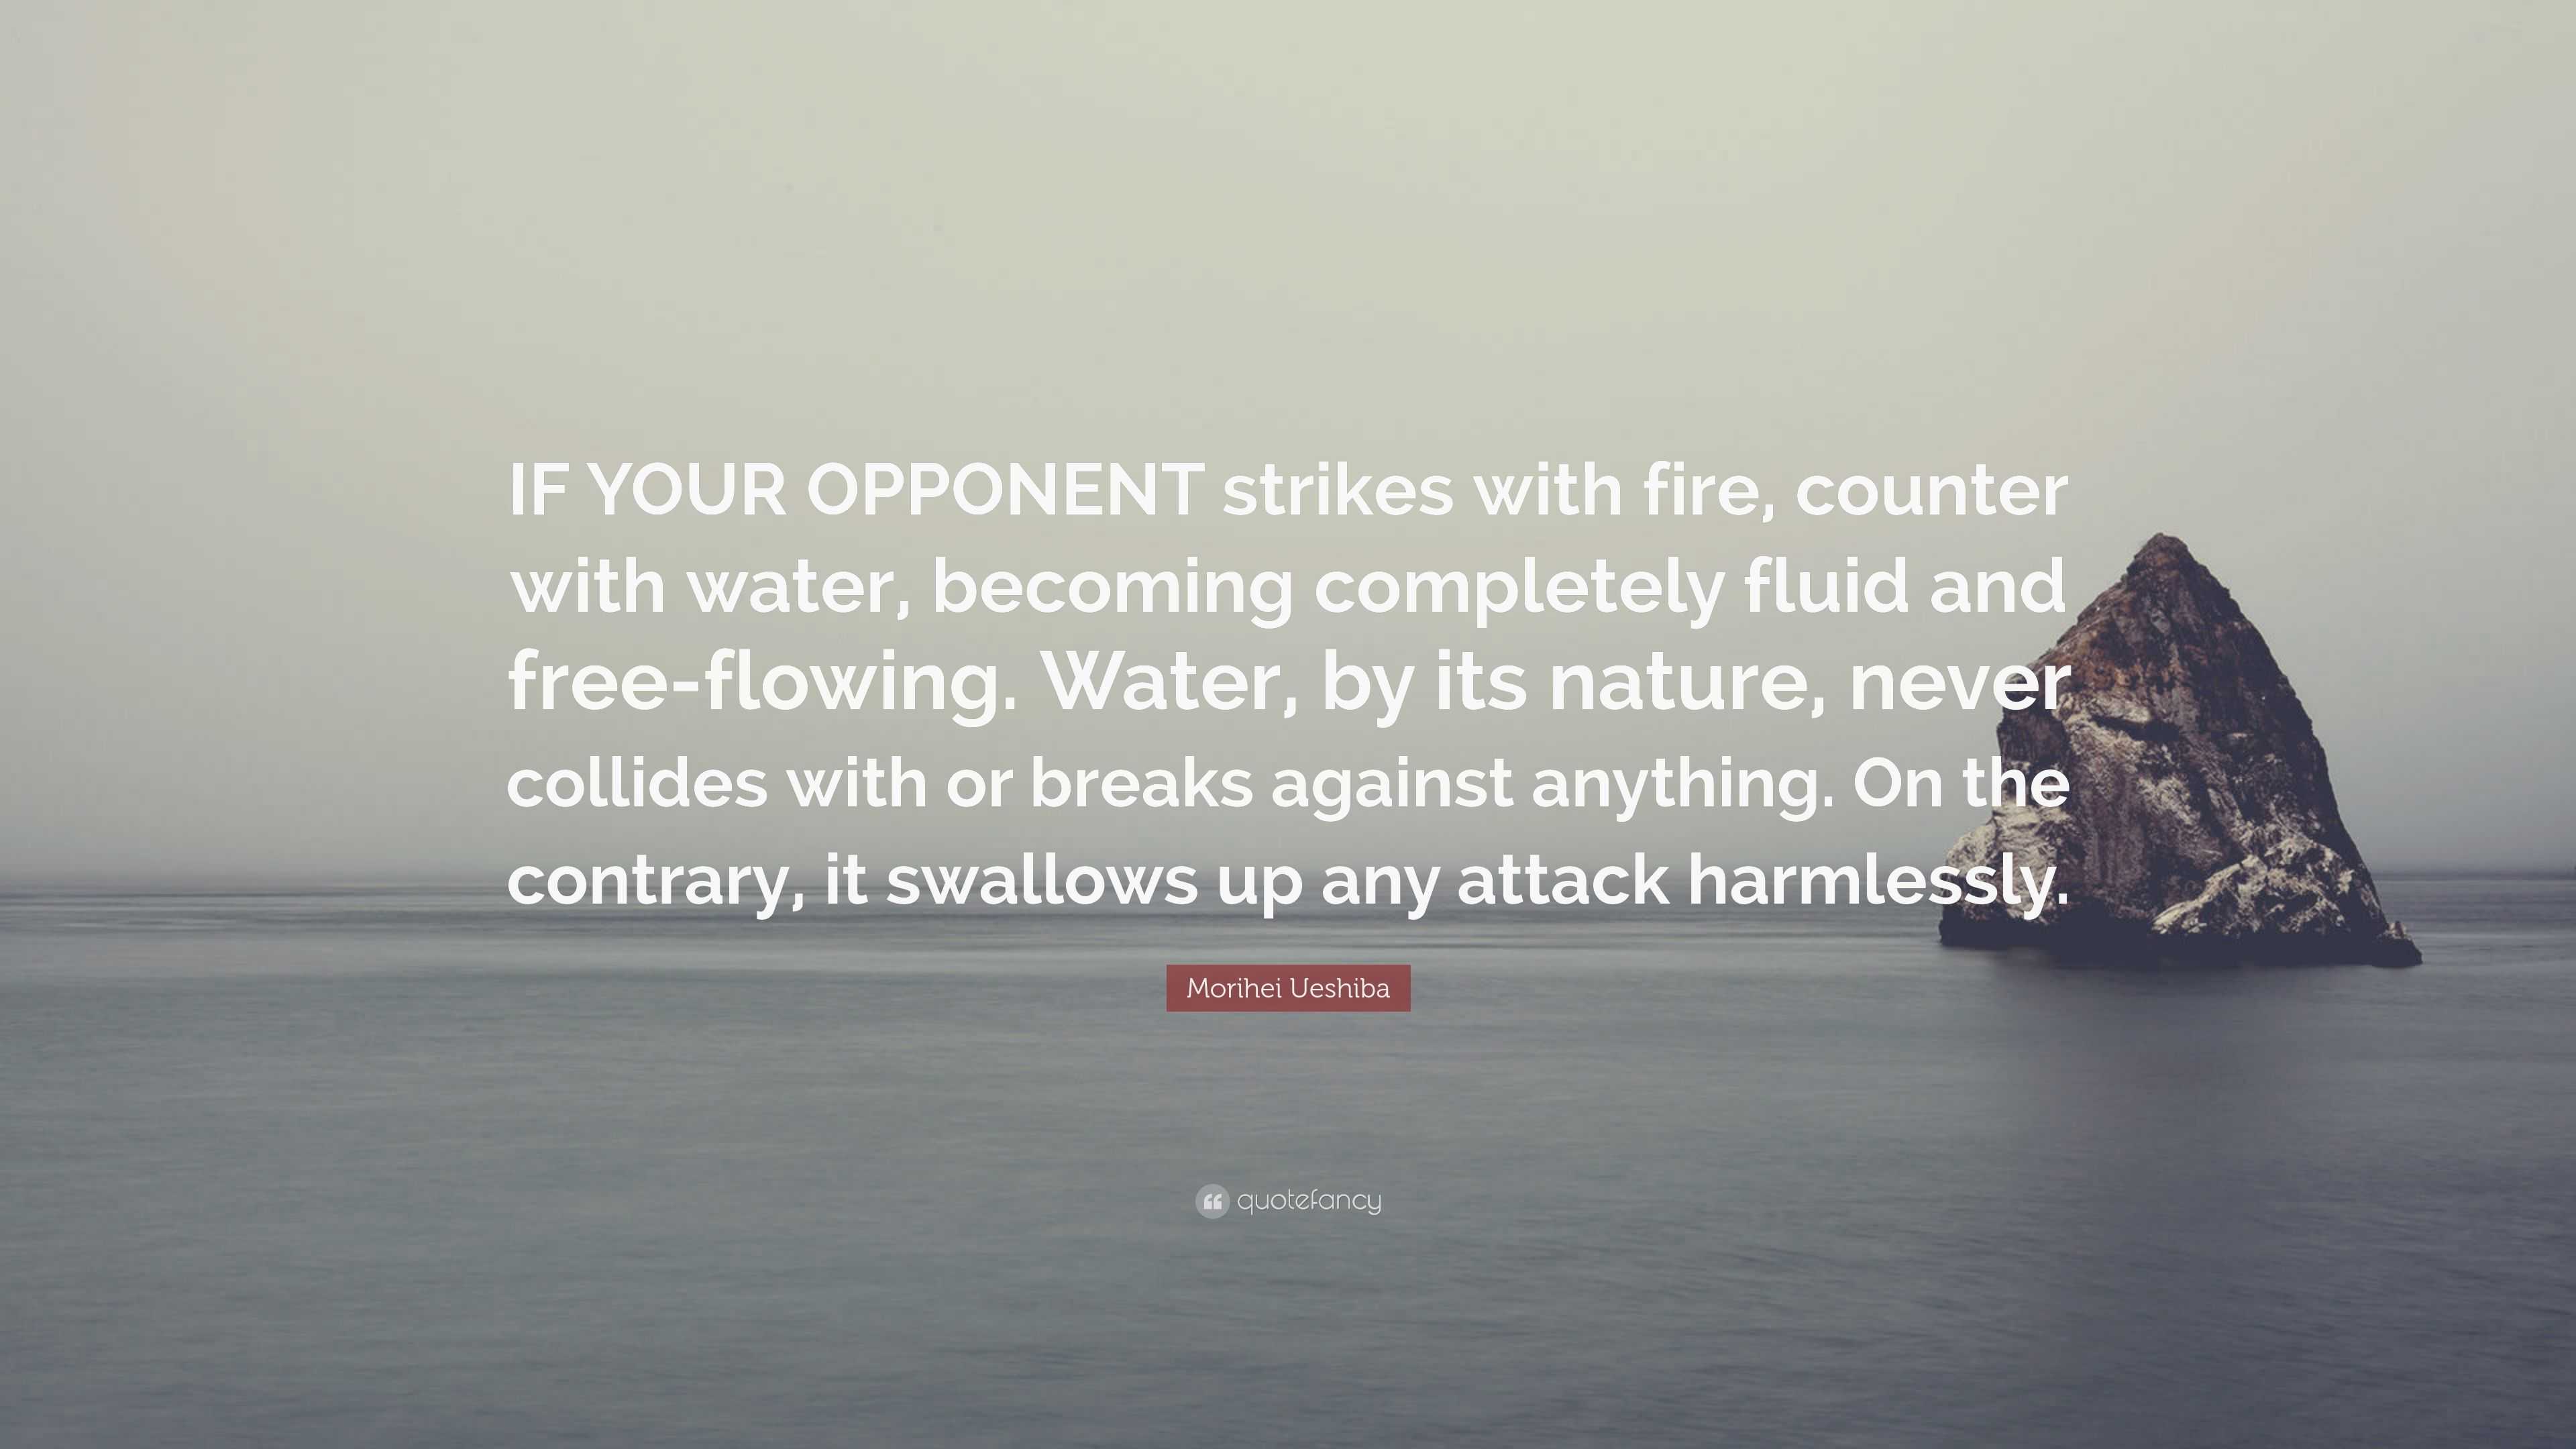 Morihei Ueshiba Quote: “IF YOUR OPPONENT strikes with fire, counter ...